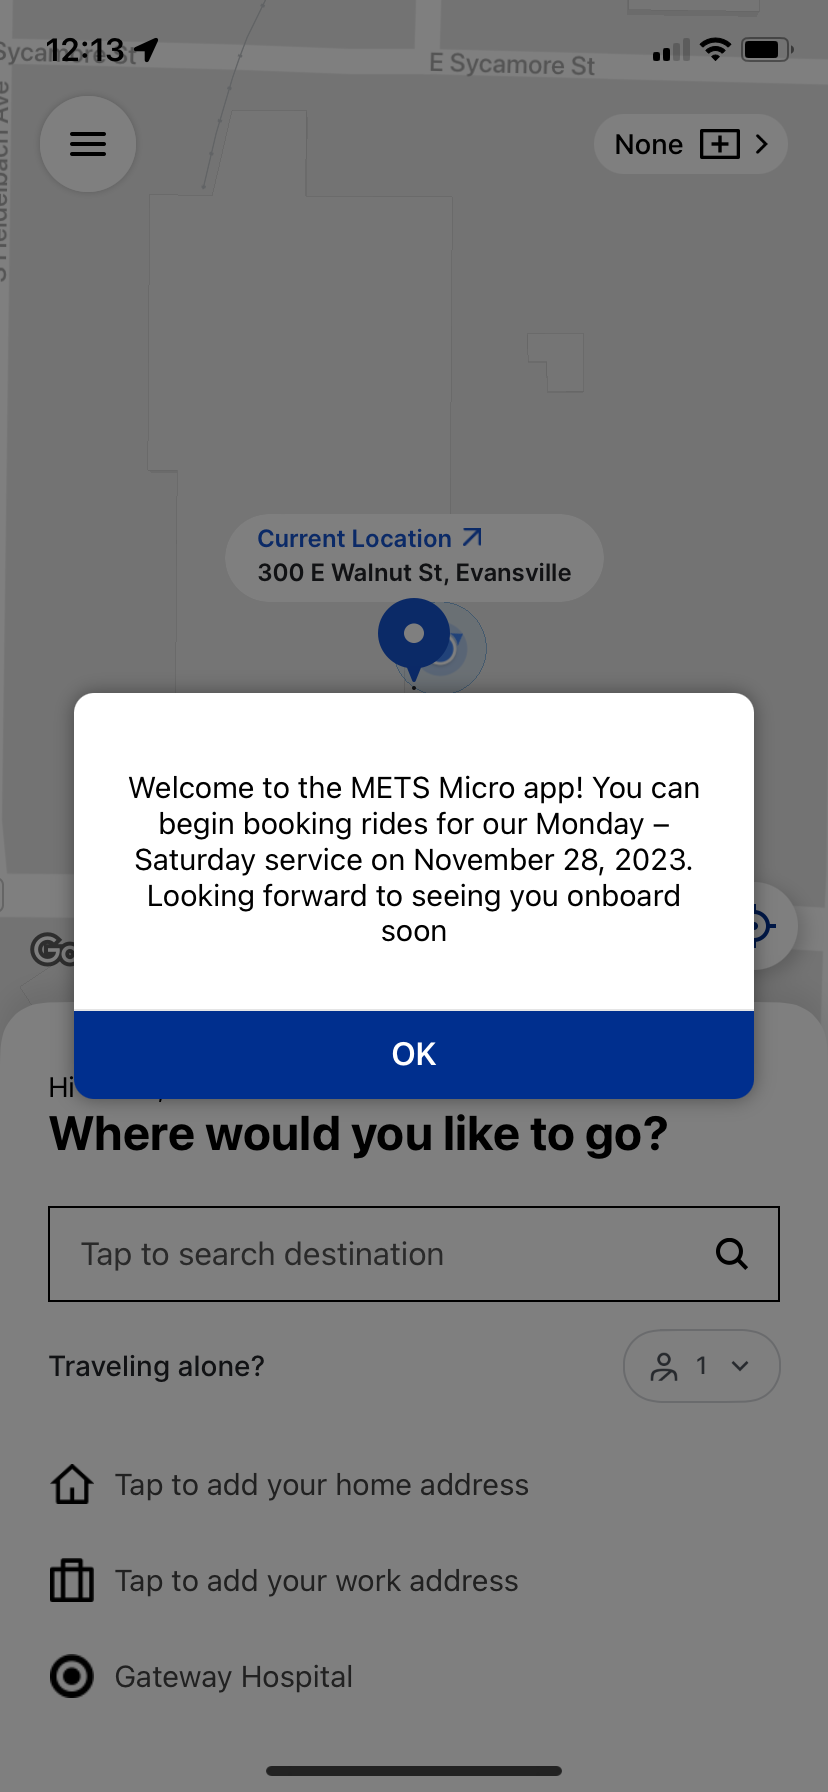 Screenshots from the METS Micro app on iPhone.